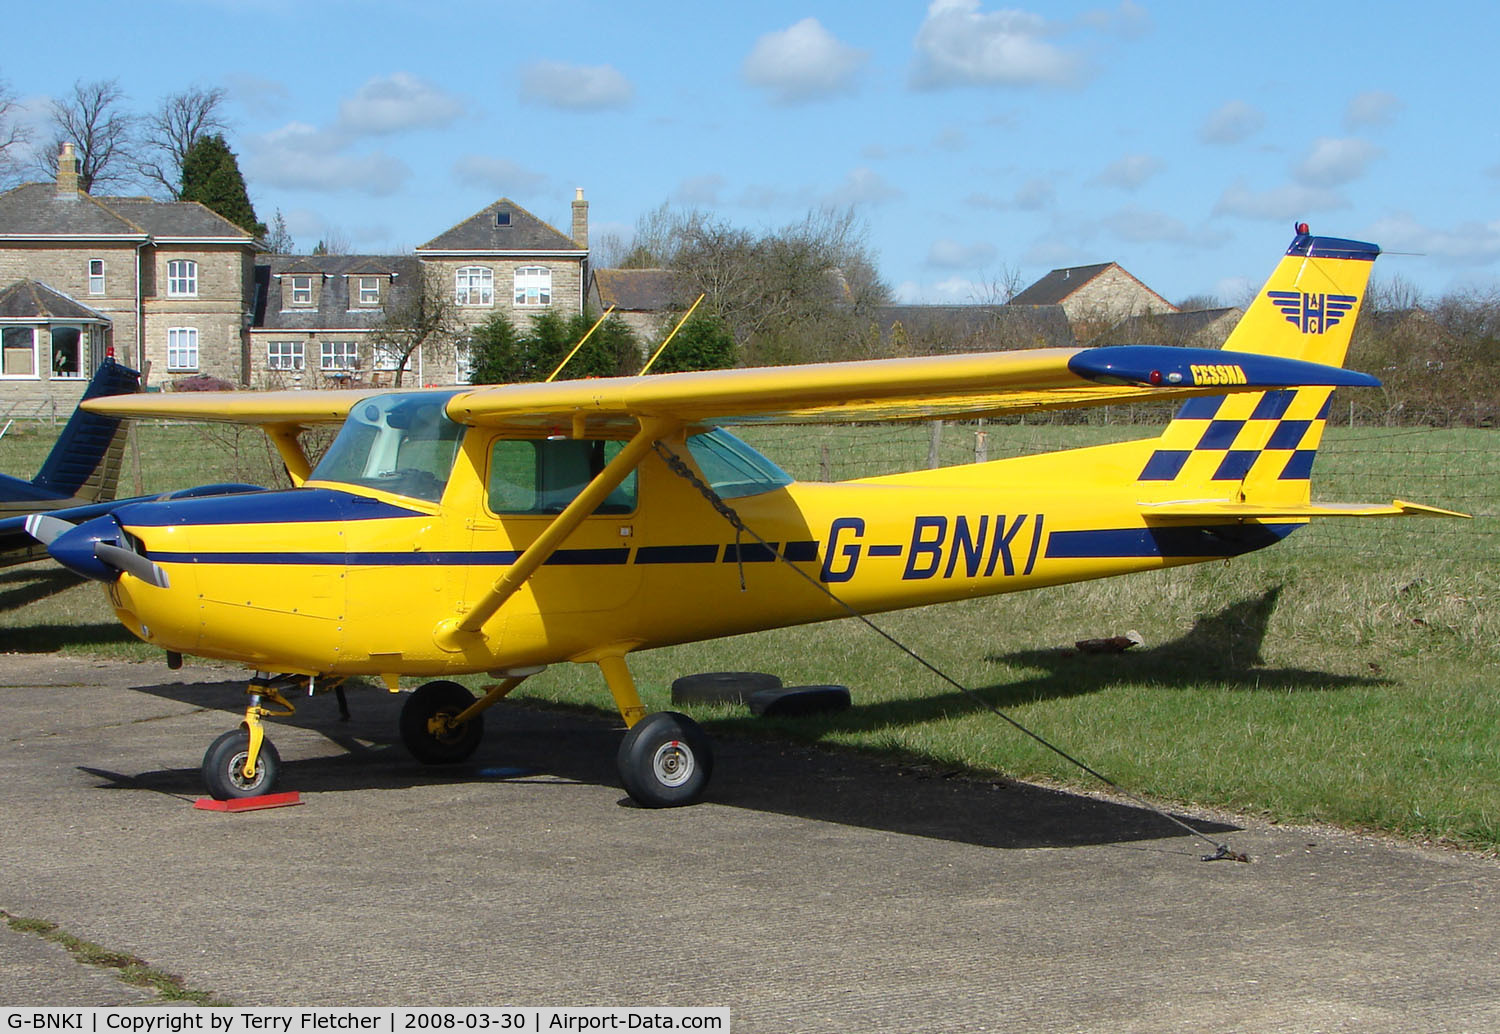 G-BNKI, 1978 Cessna 152 C/N 152-81765, Based aircraft at the quaintly named Hinton-in-the-Hedges airfield